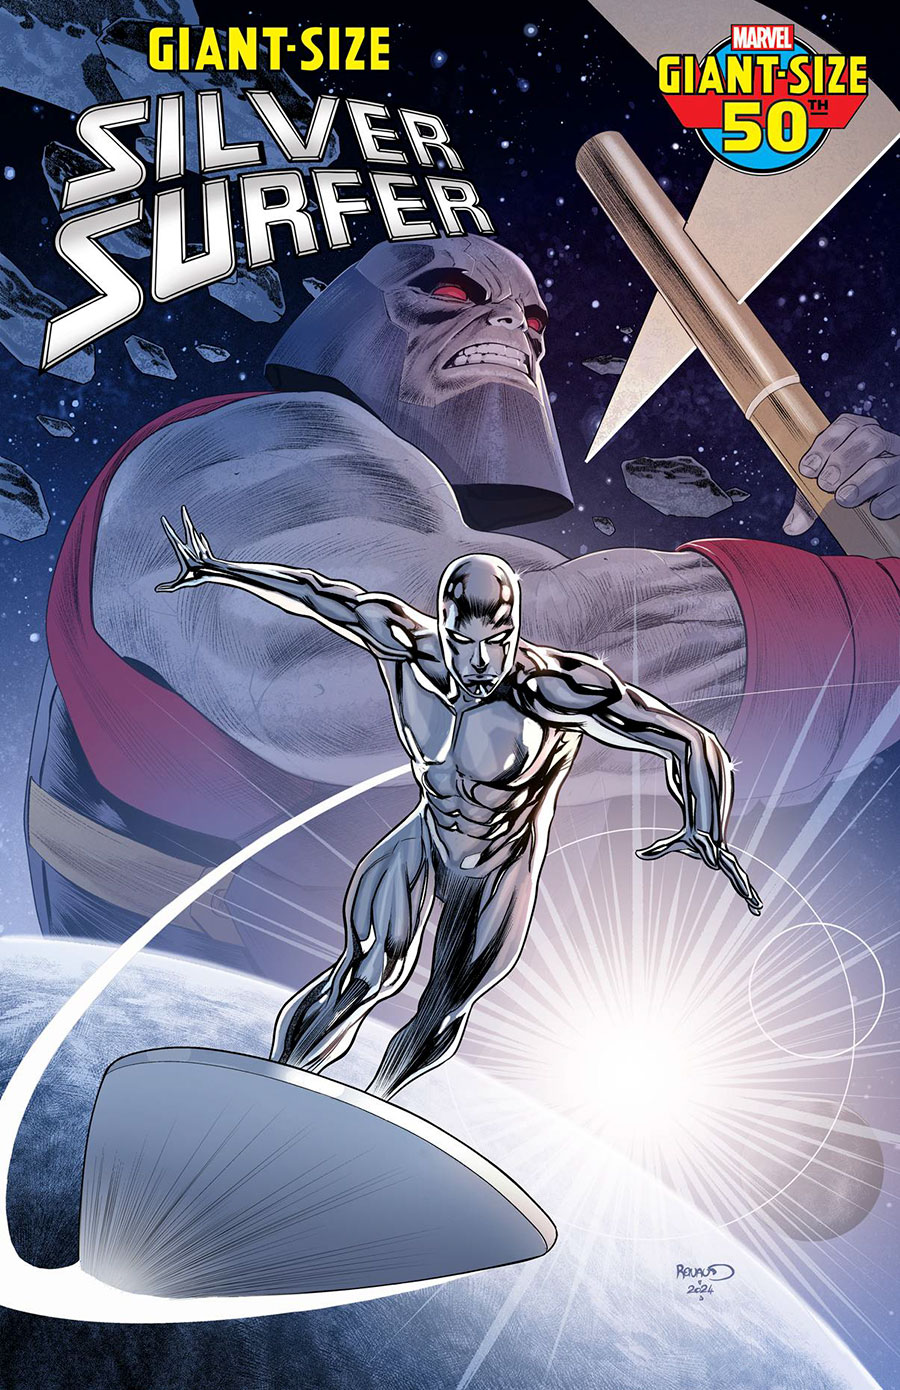 Giant-Size Silver Surfer #1 (One Shot) Cover C Variant Paul Renaud Cover